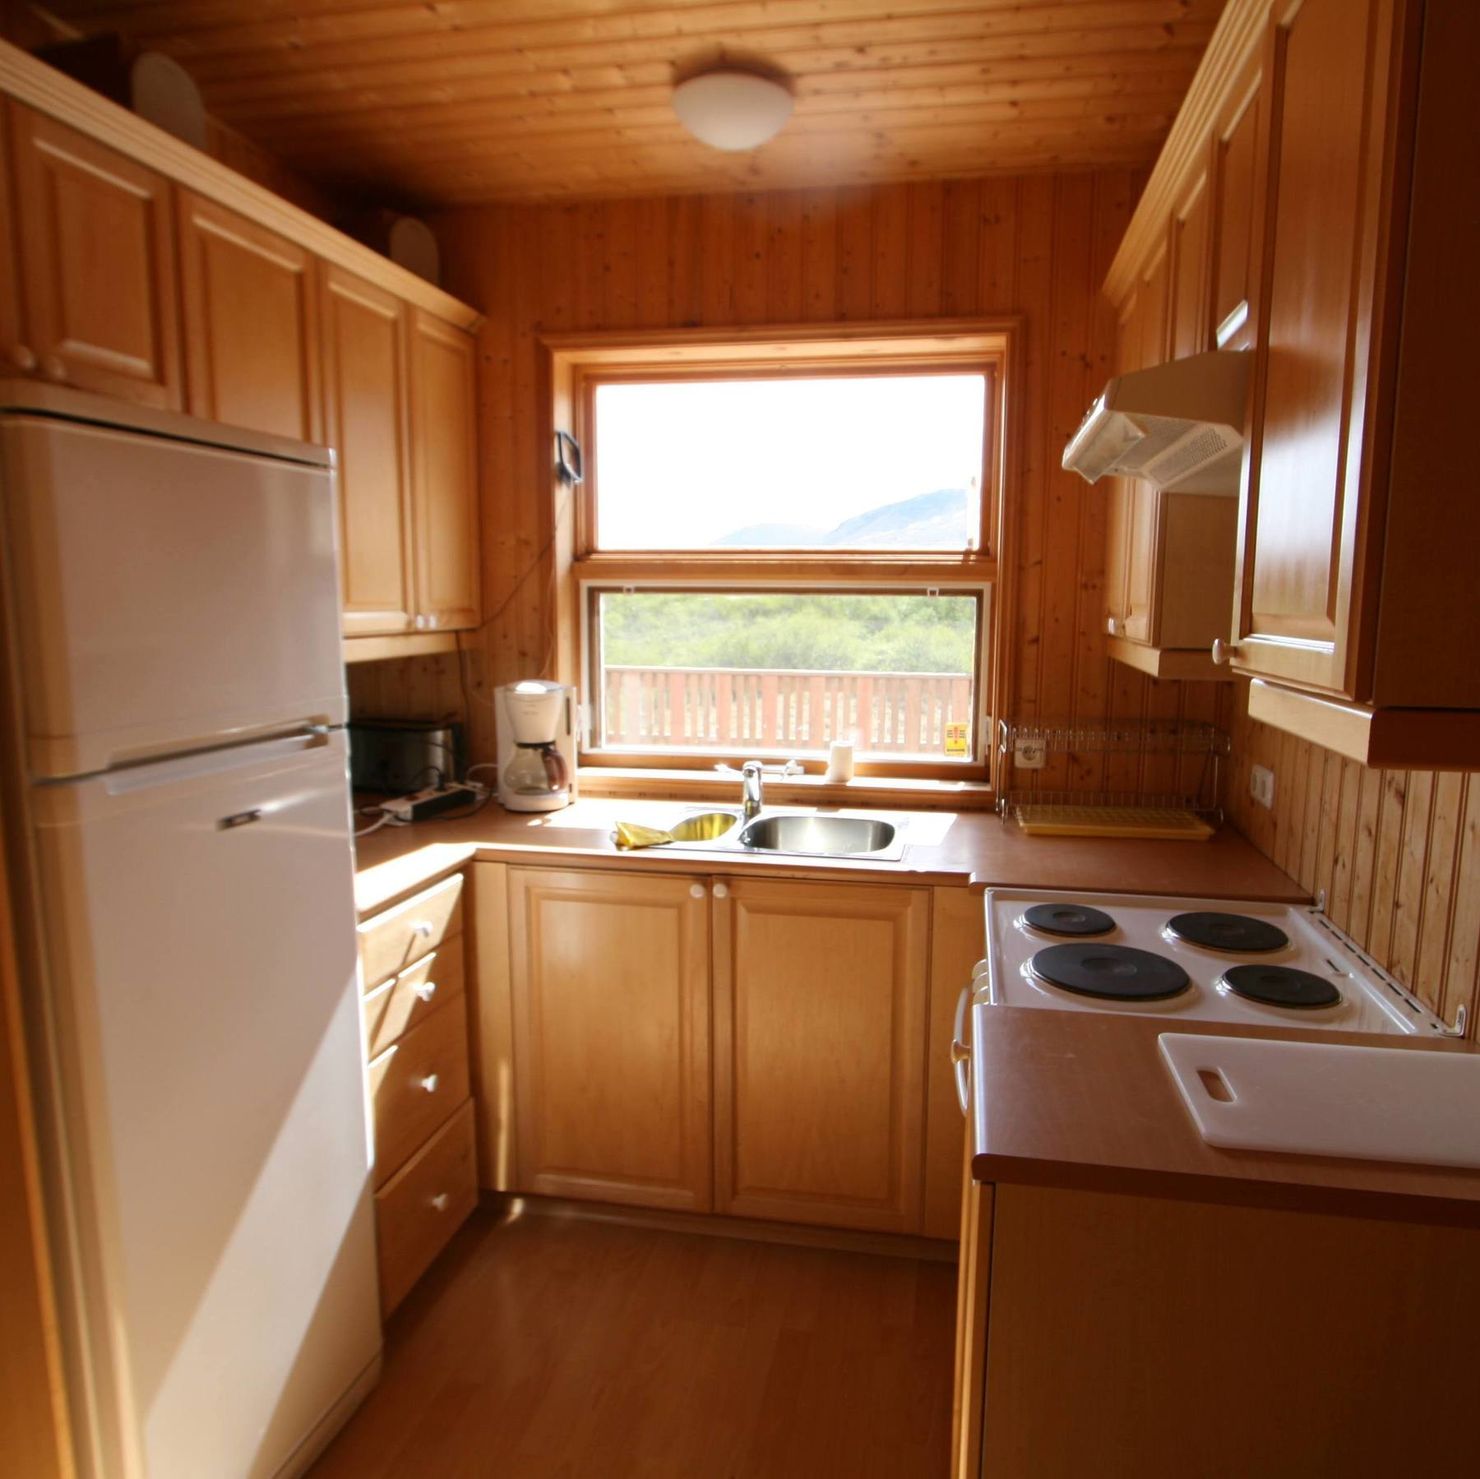 Fully equipped kitchen with large refrigerator and stove